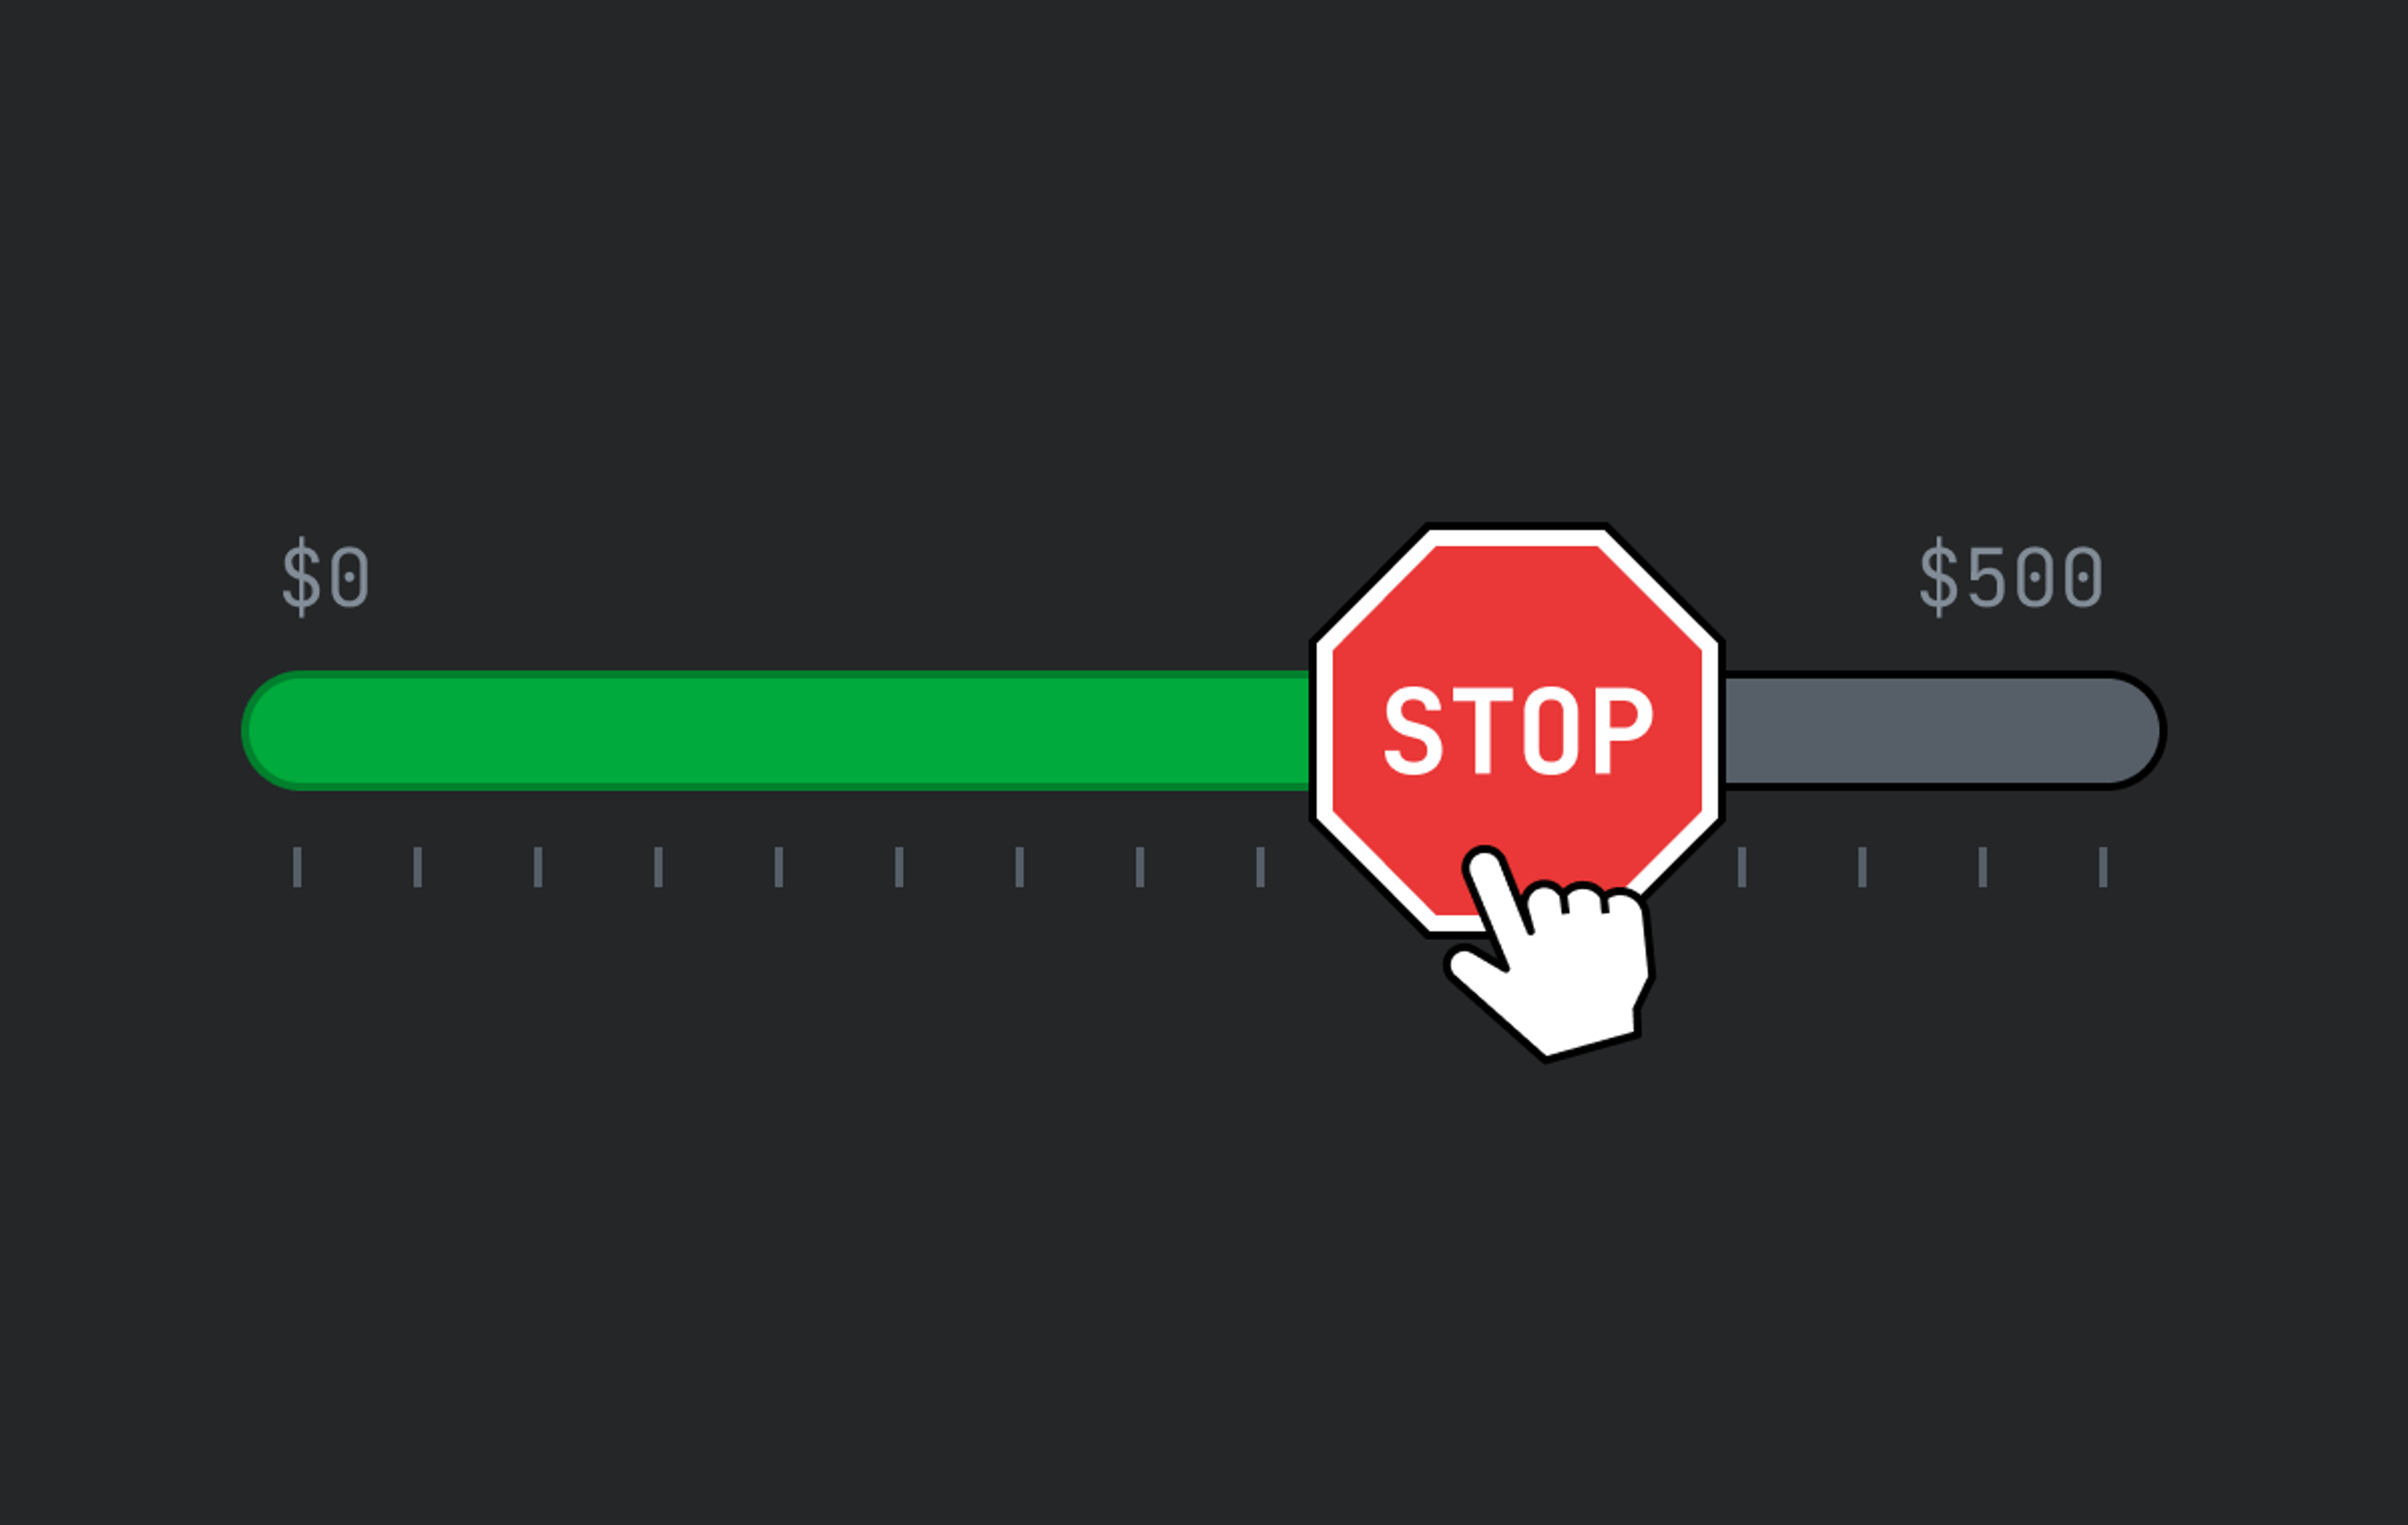 A slider going from $0 to $500 with a stop sign and part way through the slider. To the left of the stop sign, the bar is green, to the right, it's grey. 